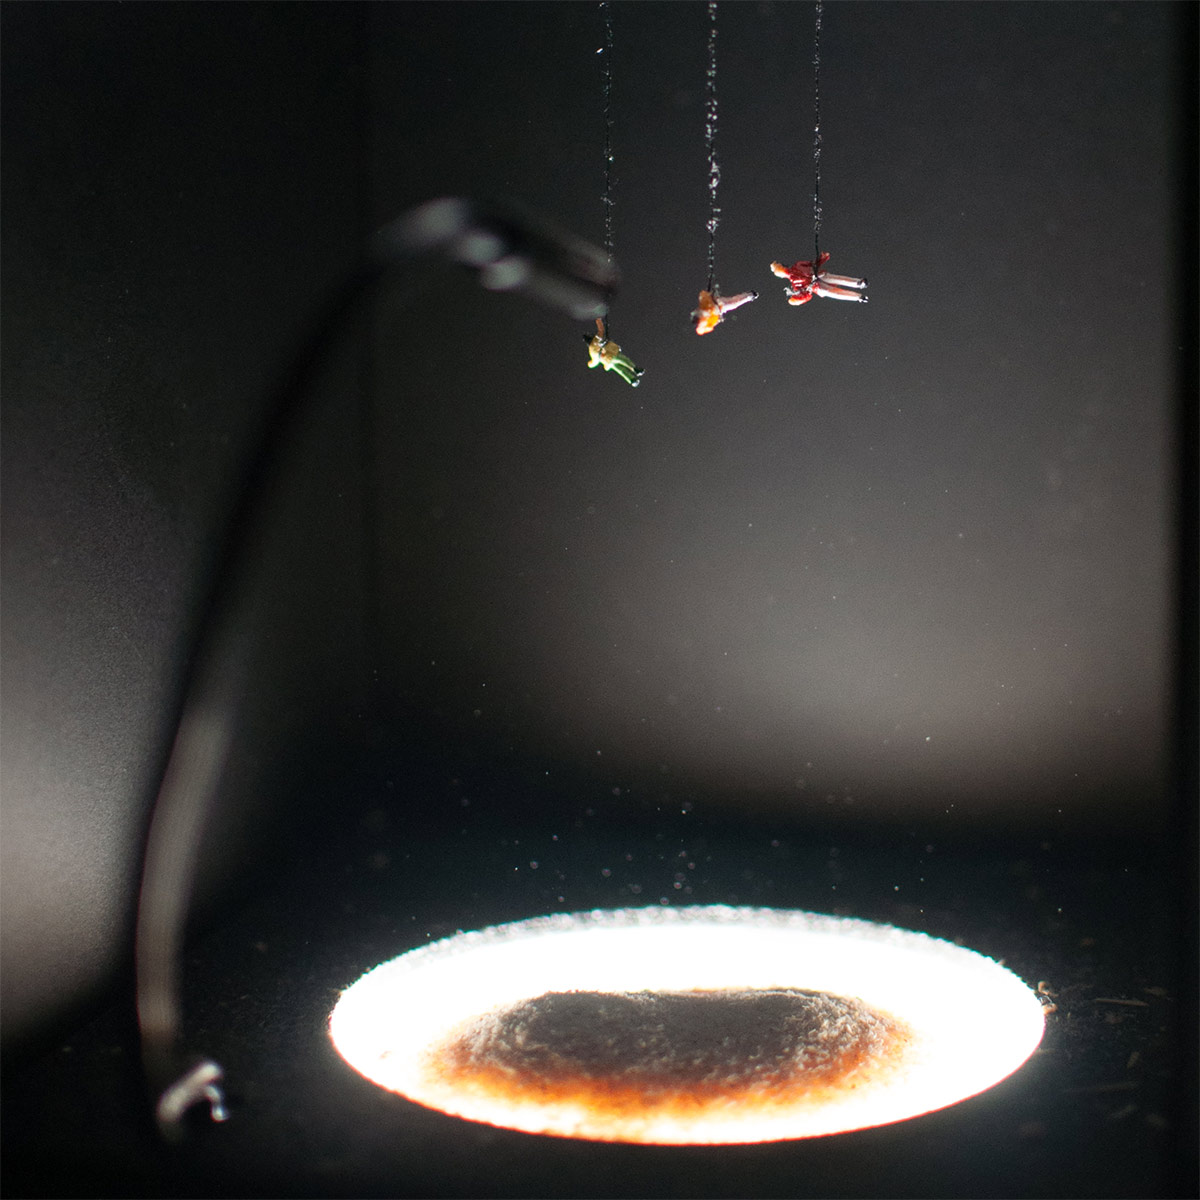 miniature people suspended in air above a pit